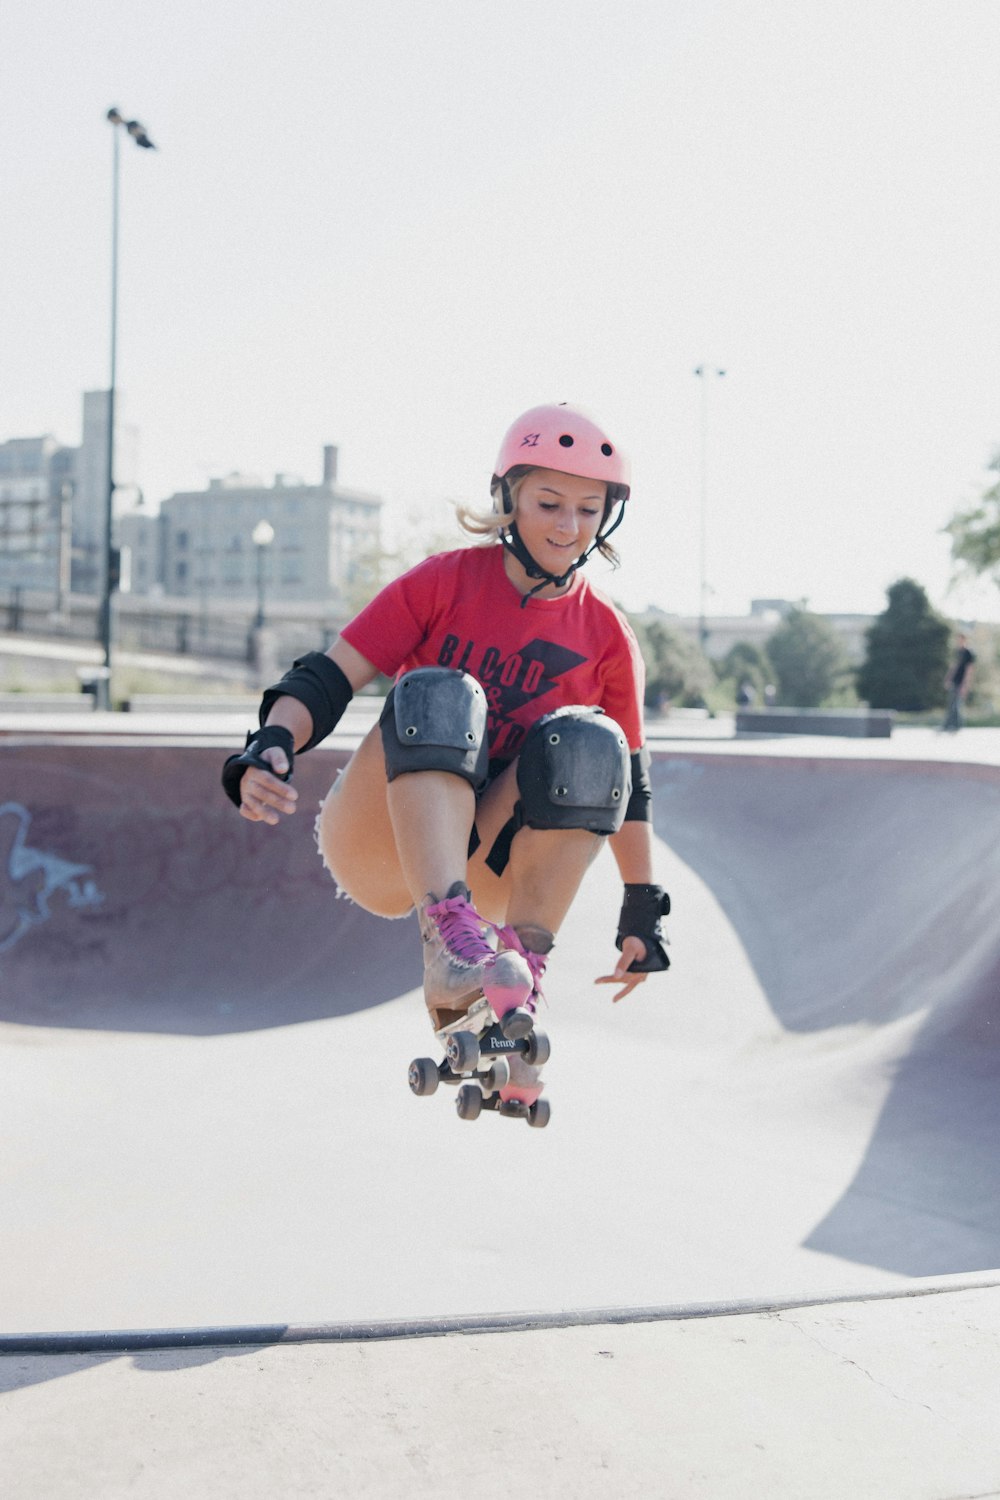 girl in red and black jersey shirt and helmet riding on white and black skateboard during